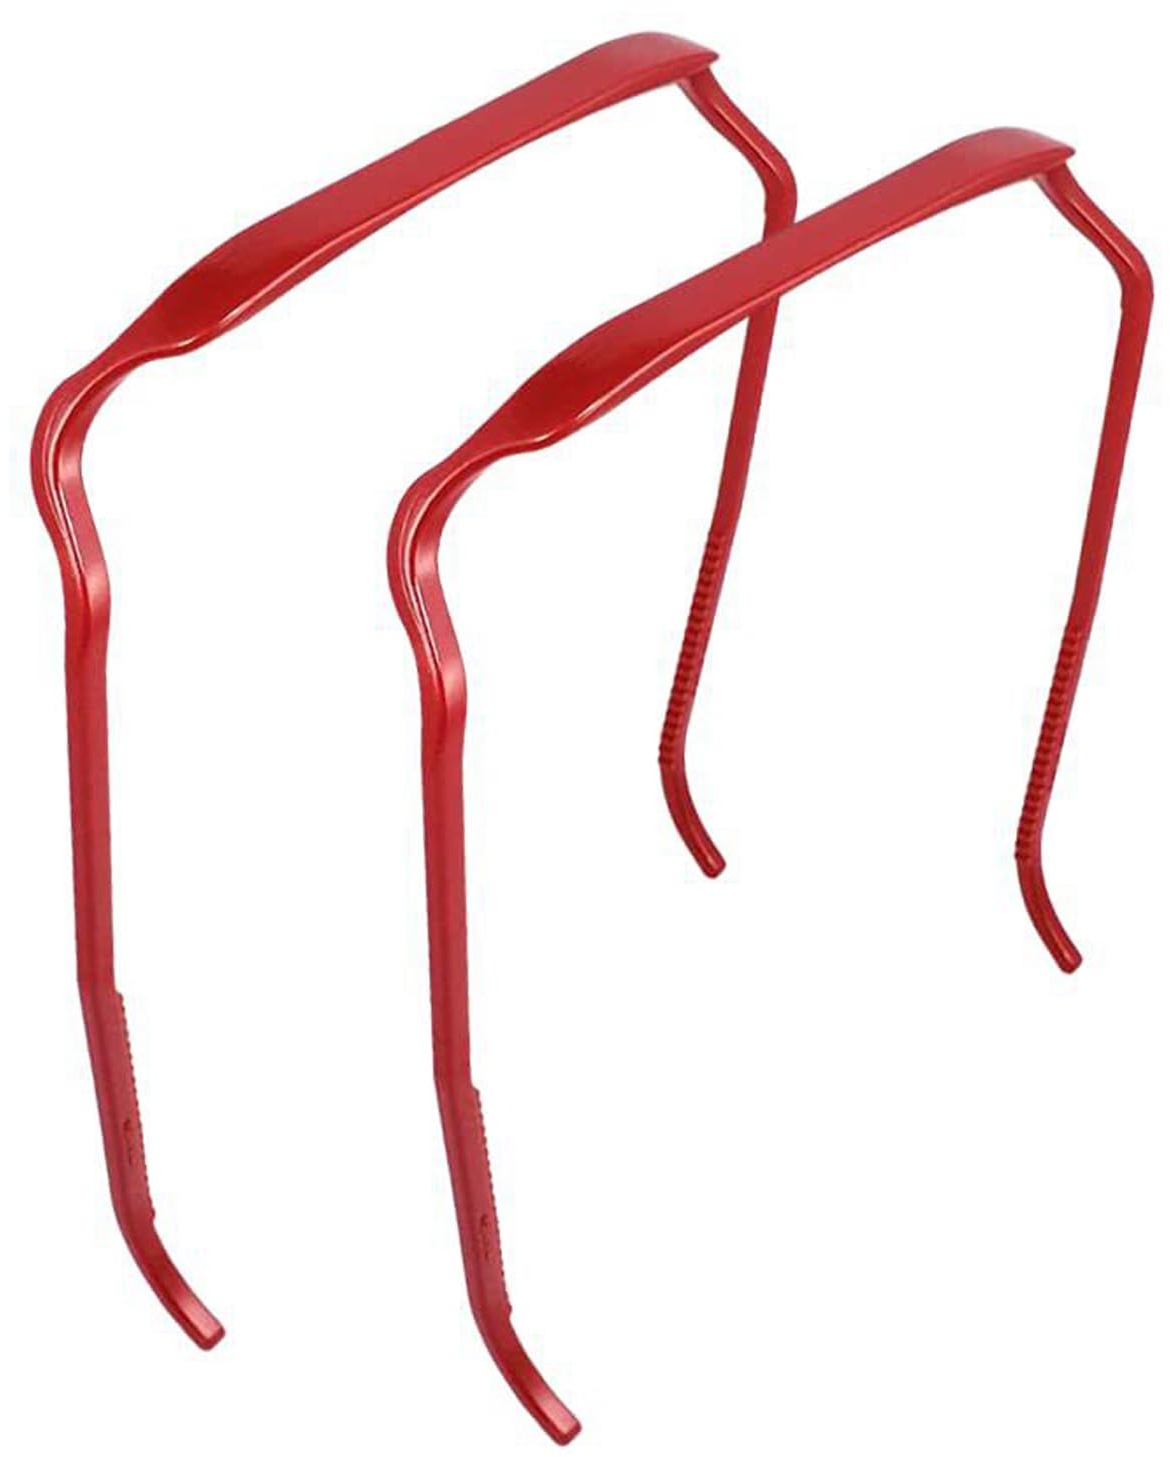 Curly Thick Hair Large Headband,Curly Hair Plastic Hair Hoop Hairband,Sunglasses Headband,Invisible Hair Hoop,Get Volume And Style Hair Without The Headache-Red